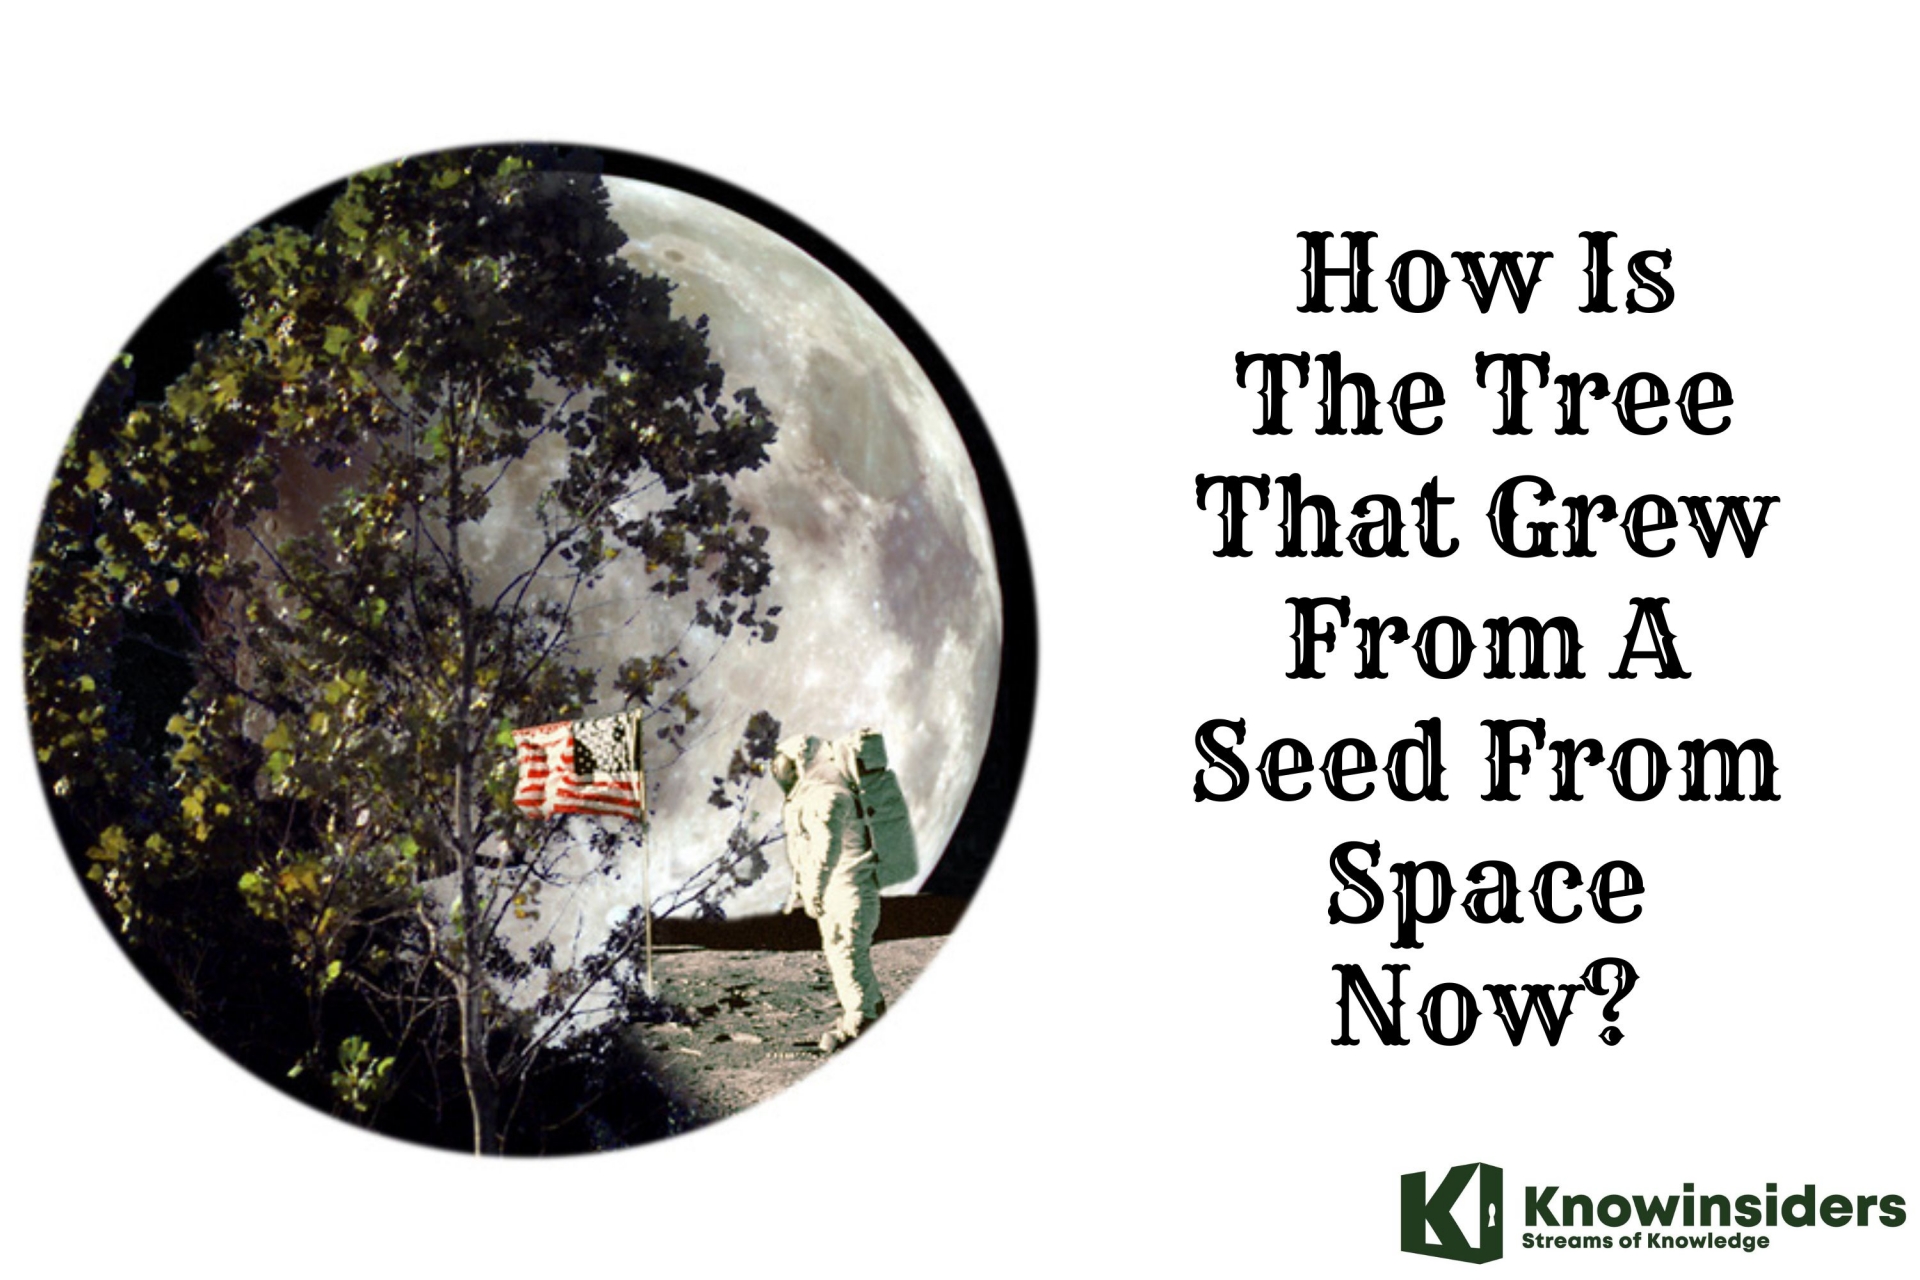 How Is The Tree That Grew From A Seed From Space Now?